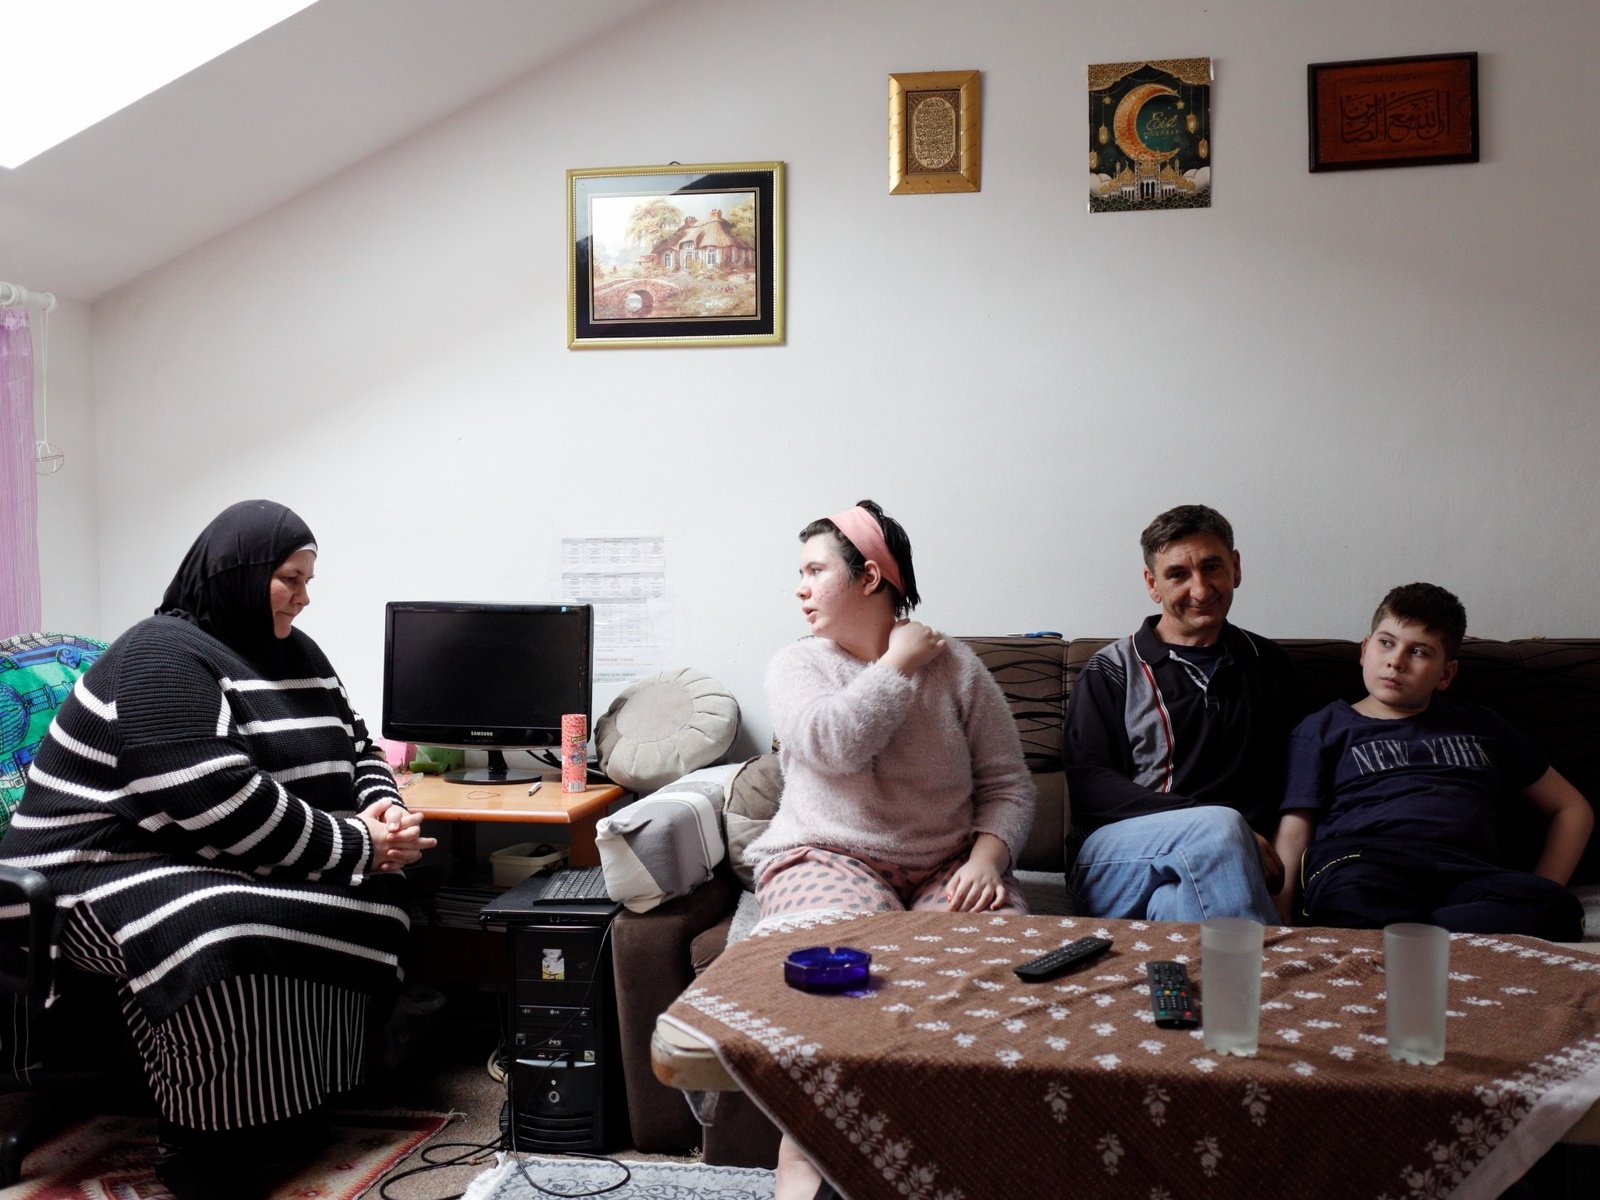 Anes, 50, second from the right, spends time with his family in his apartment, provided by the Regional Housing Programme in Bosnia and Herzegovina.